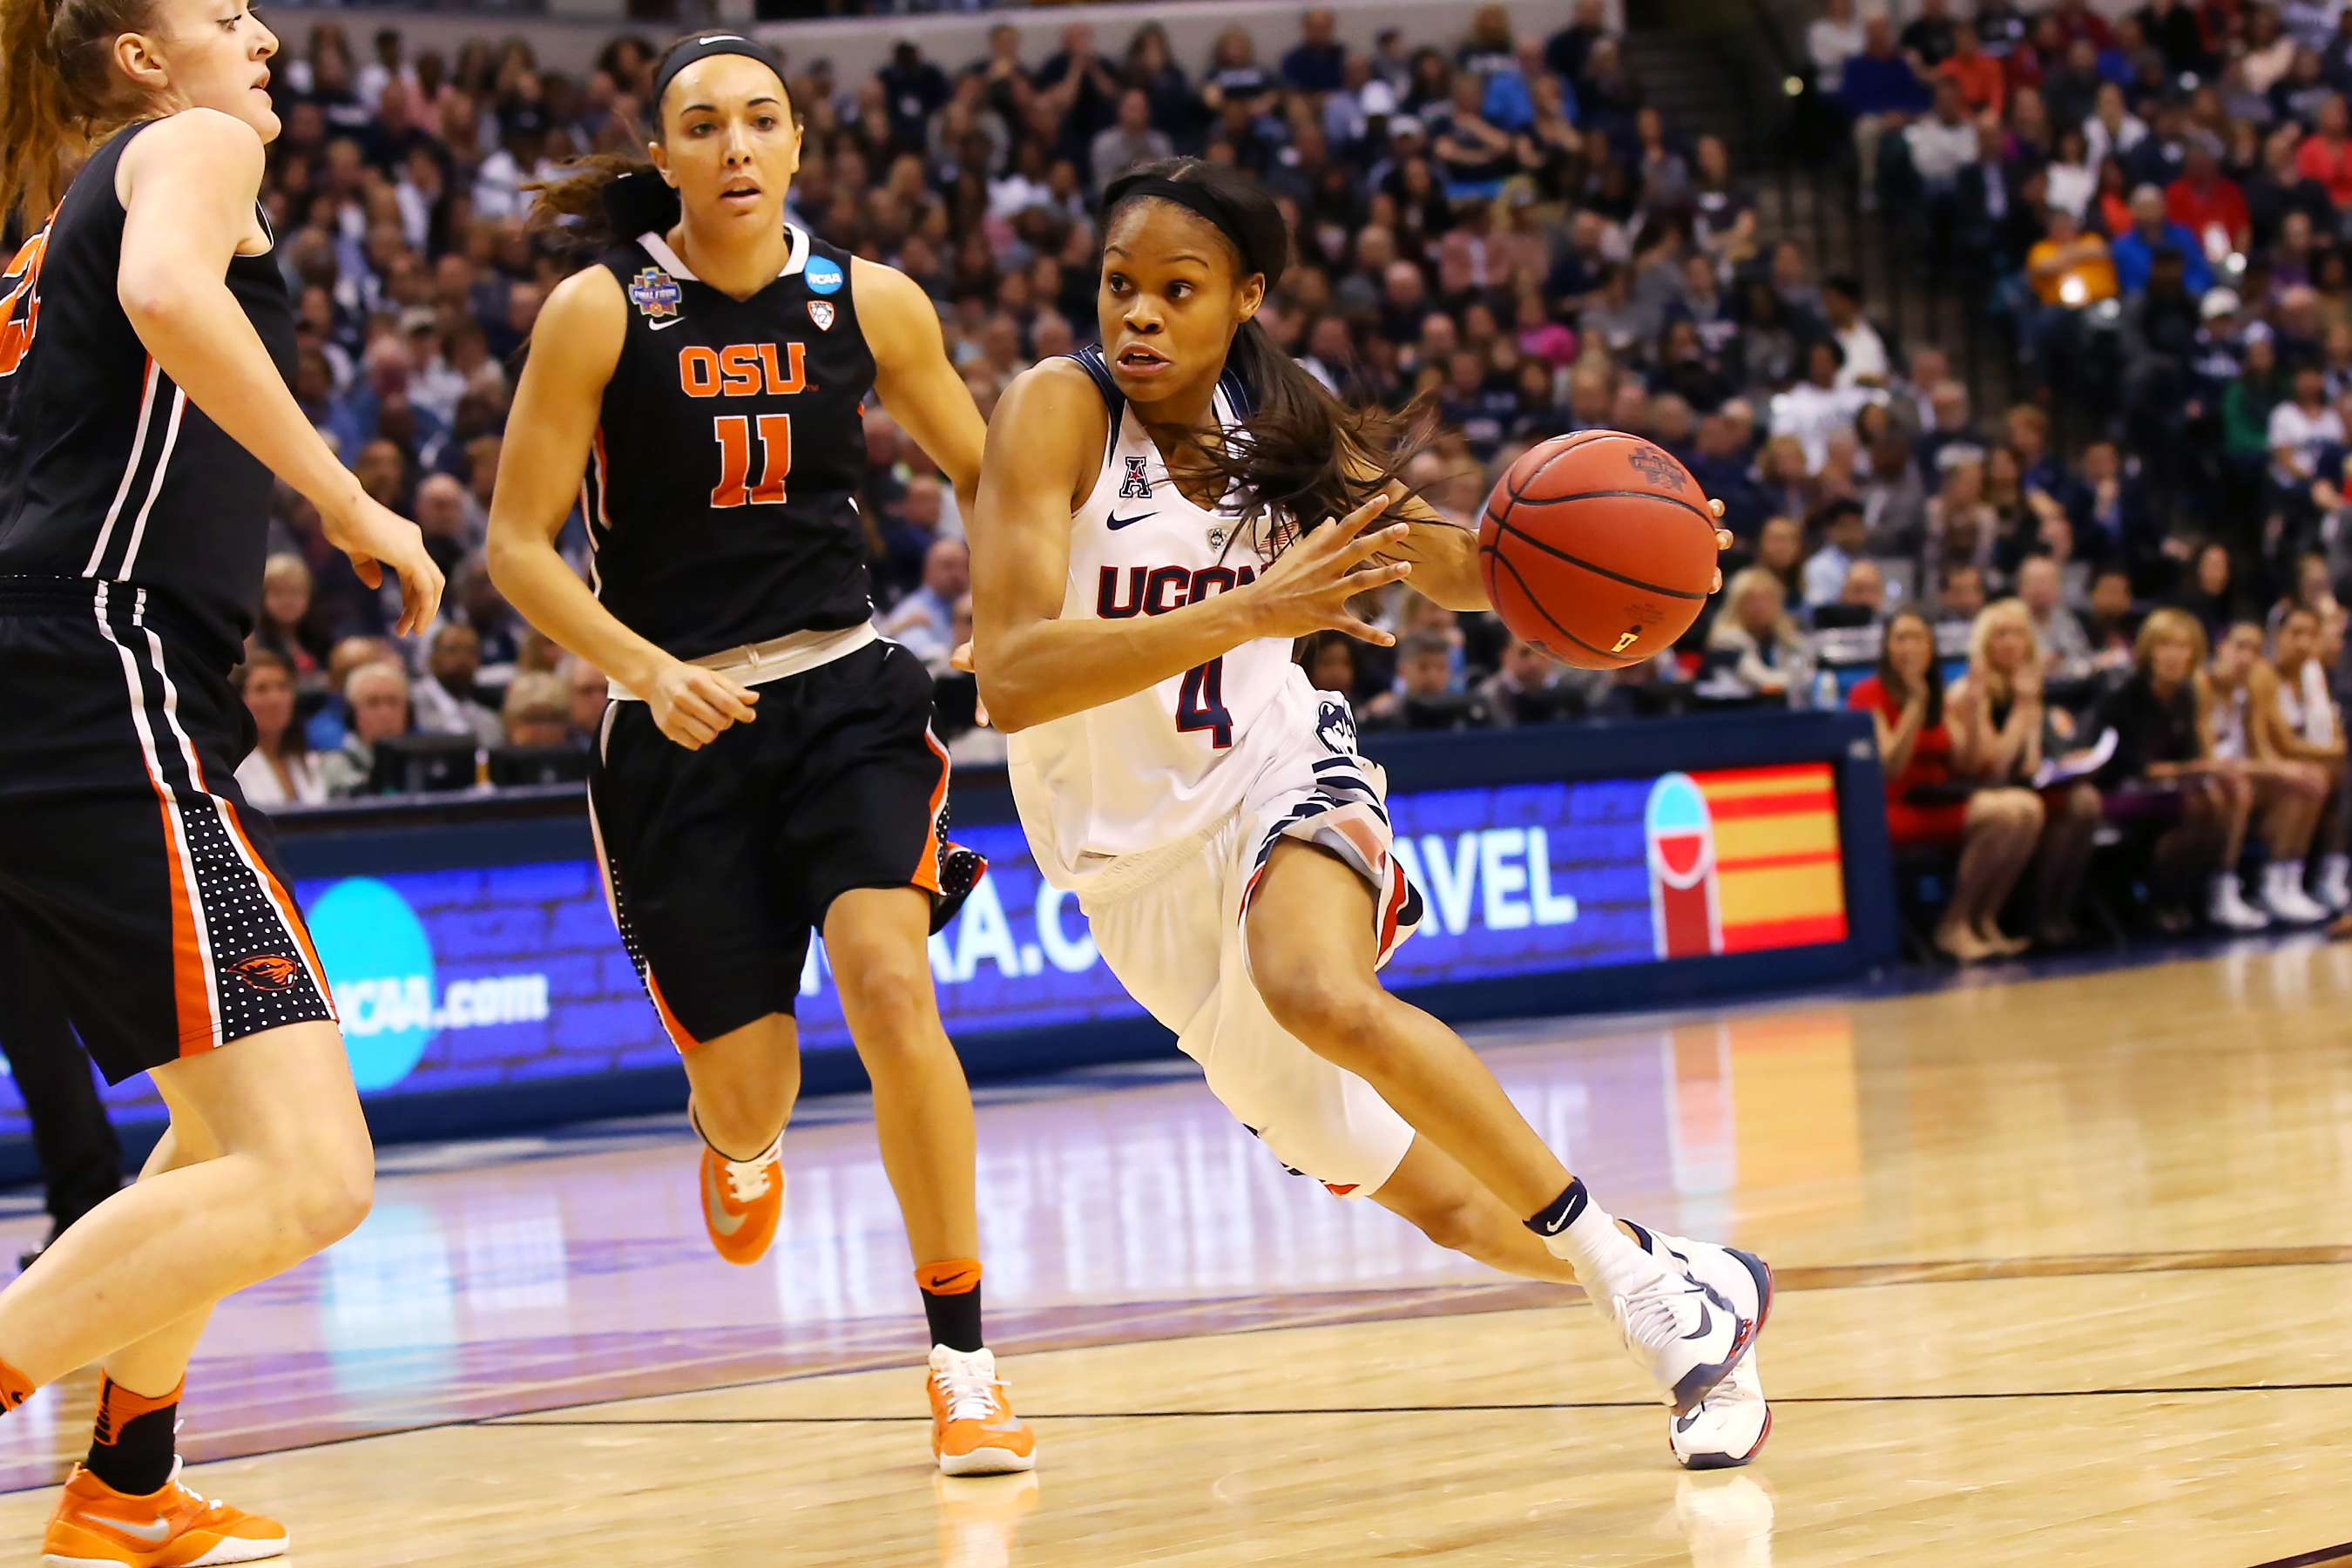 Moriah Jefferson '16 (CLAS) during the national semi-final game against Oregon State, April 3, 2016. (Stephen Slade '89 (SFA) for UConn)